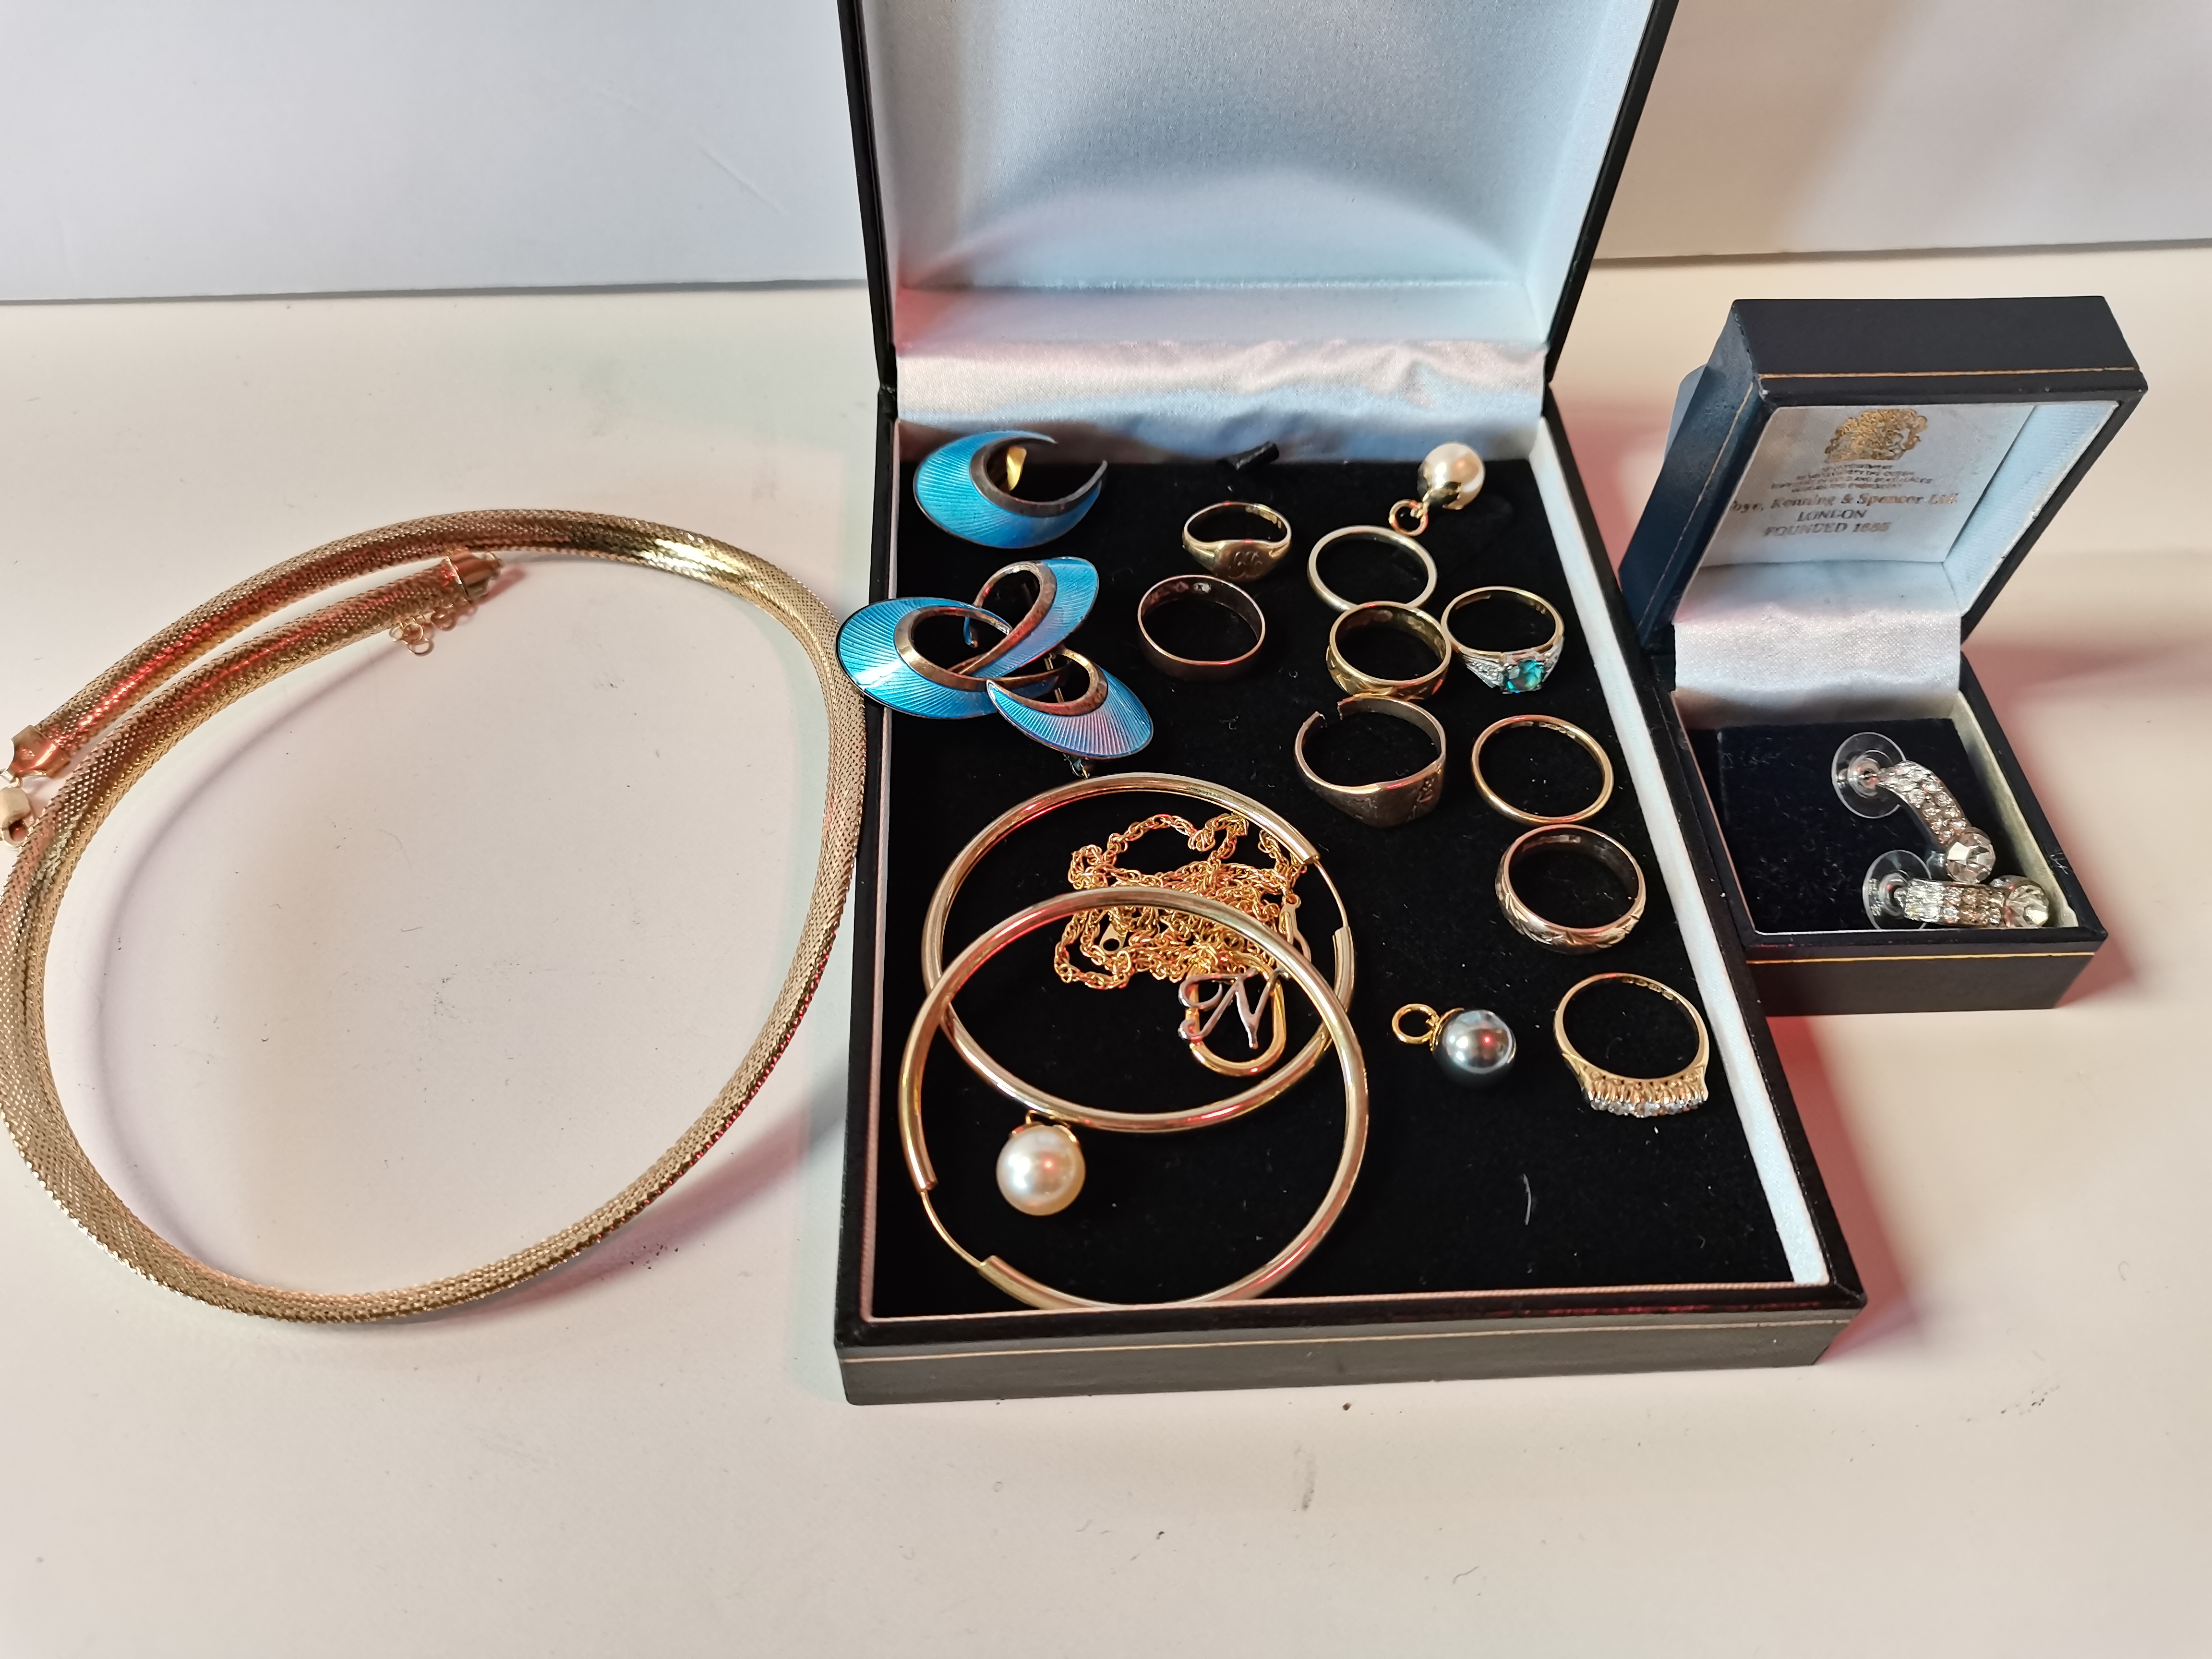 Misc. gold items : 375 gold necklace rings etc 23g 22ct ring 2g 2 x 18k rings3g